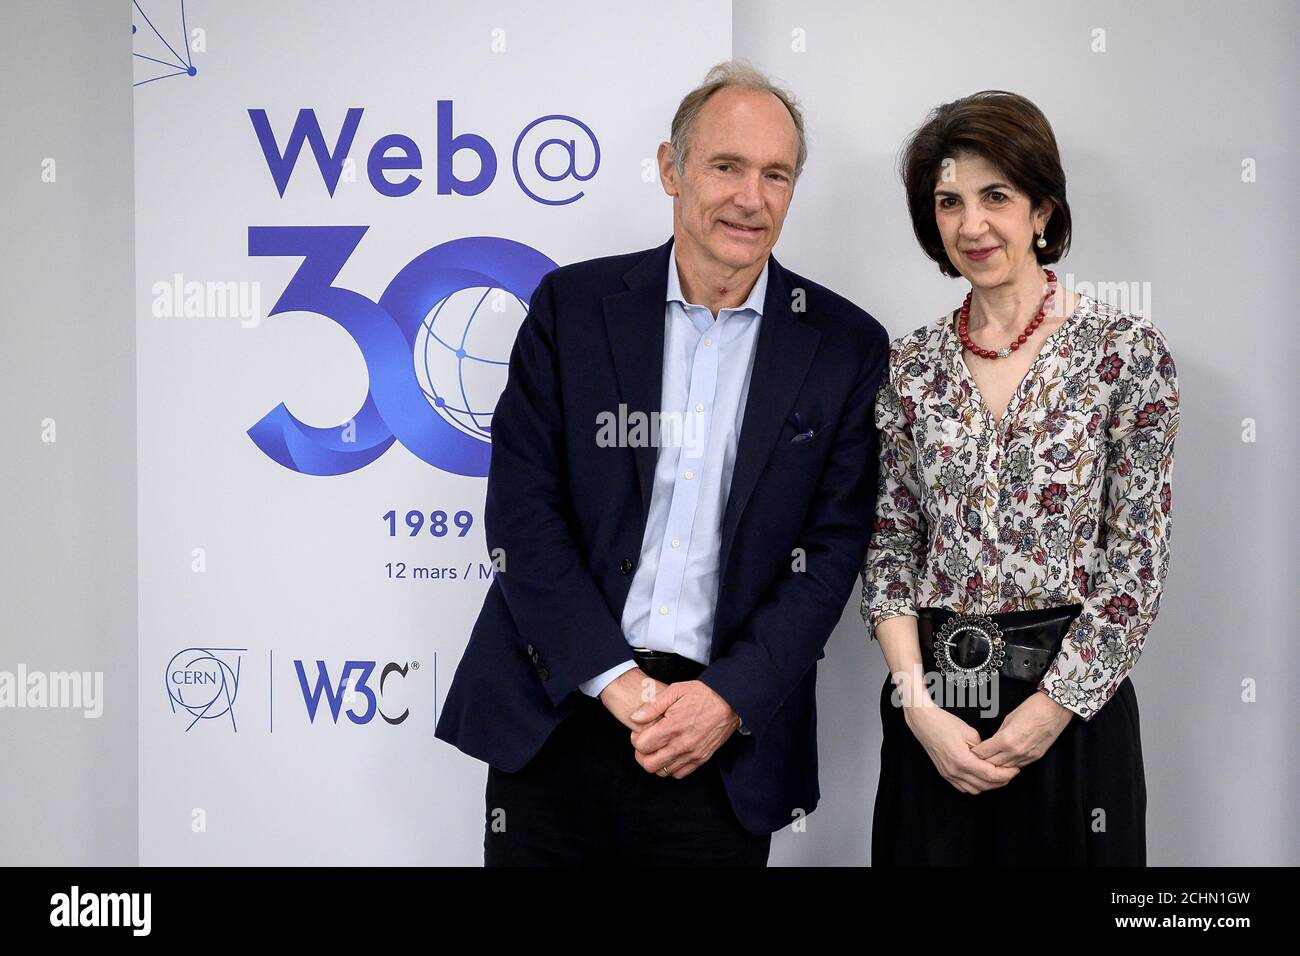 Akrobatik Pogo stick spring vinkel World Wide Web inventor Tim Berners-Lee poses with European Centre for  Nuclear Research (CERN) director general Fabiola Gianotti during an event  marking 30 years of World Wide Web, on March 12, 2019